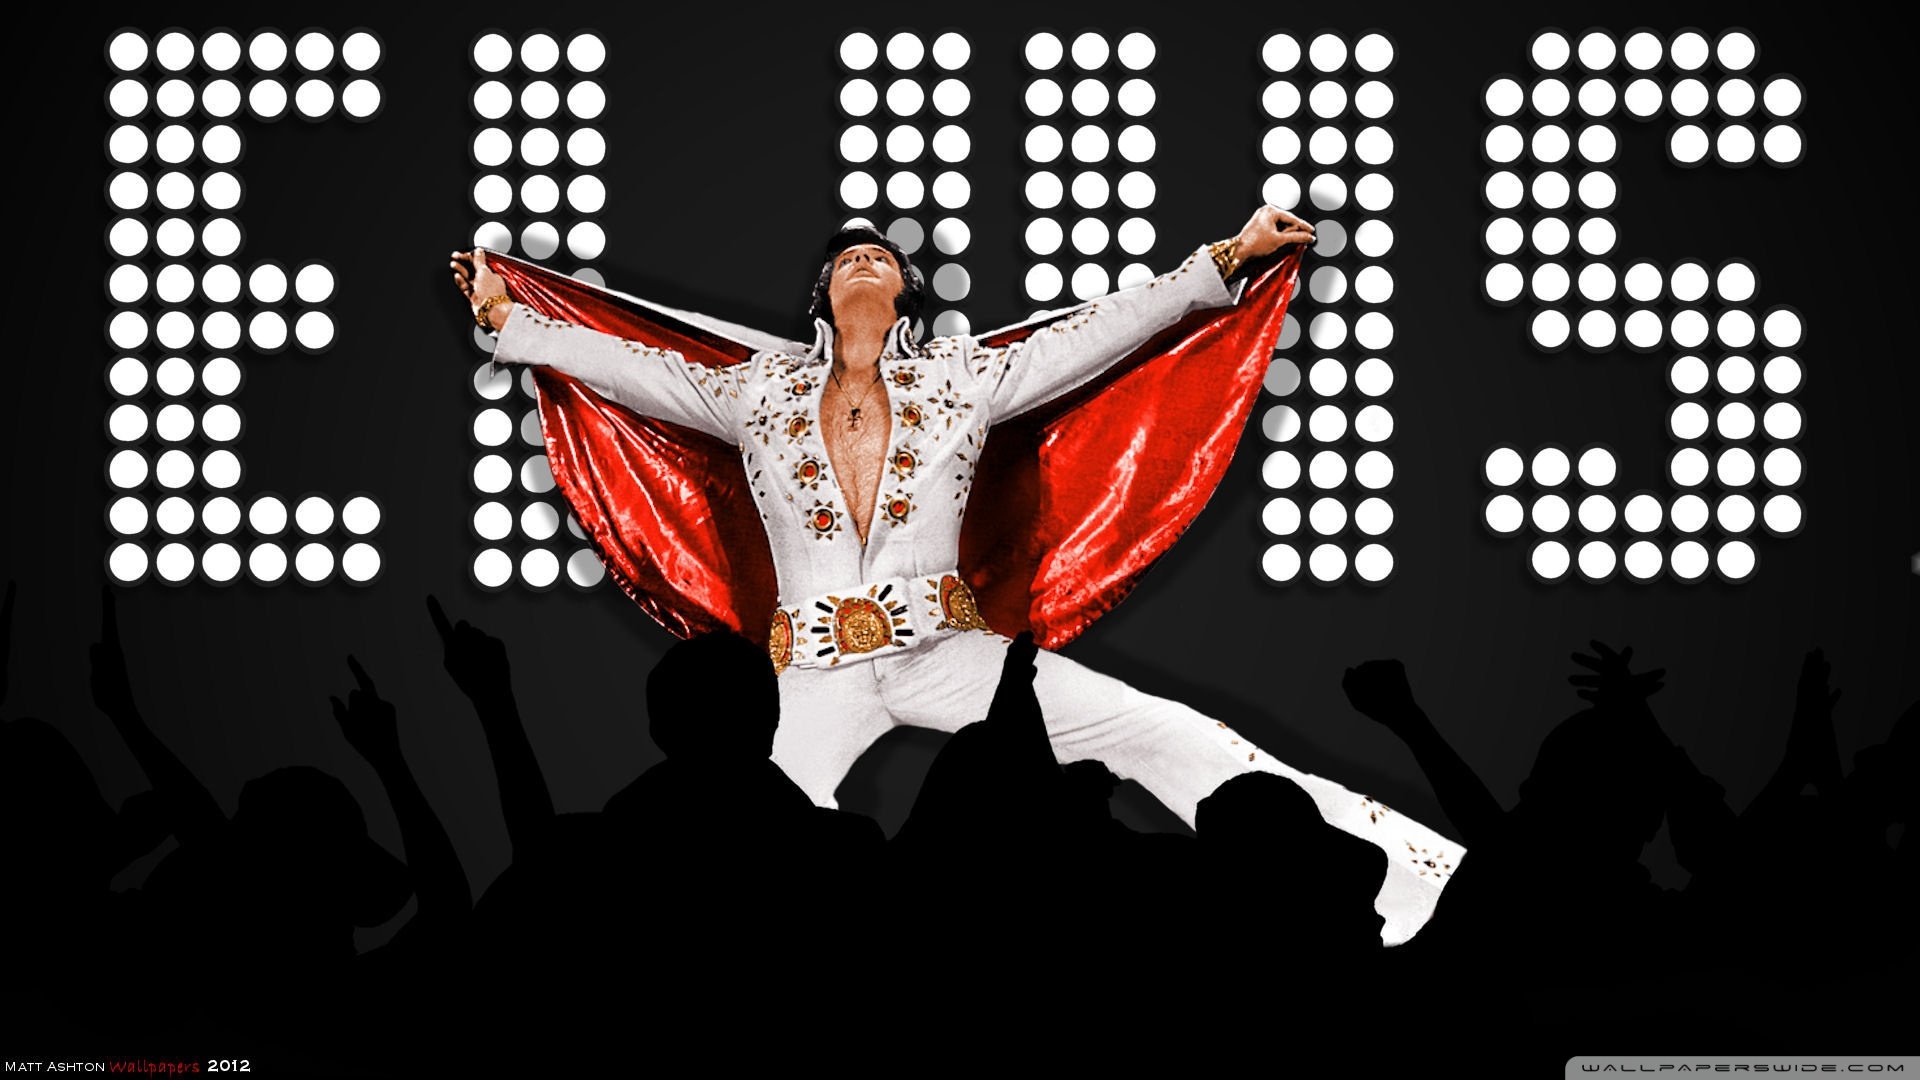 Elvis Presley Full HD Wallpaper and Background Image | 1920x1080 | ID